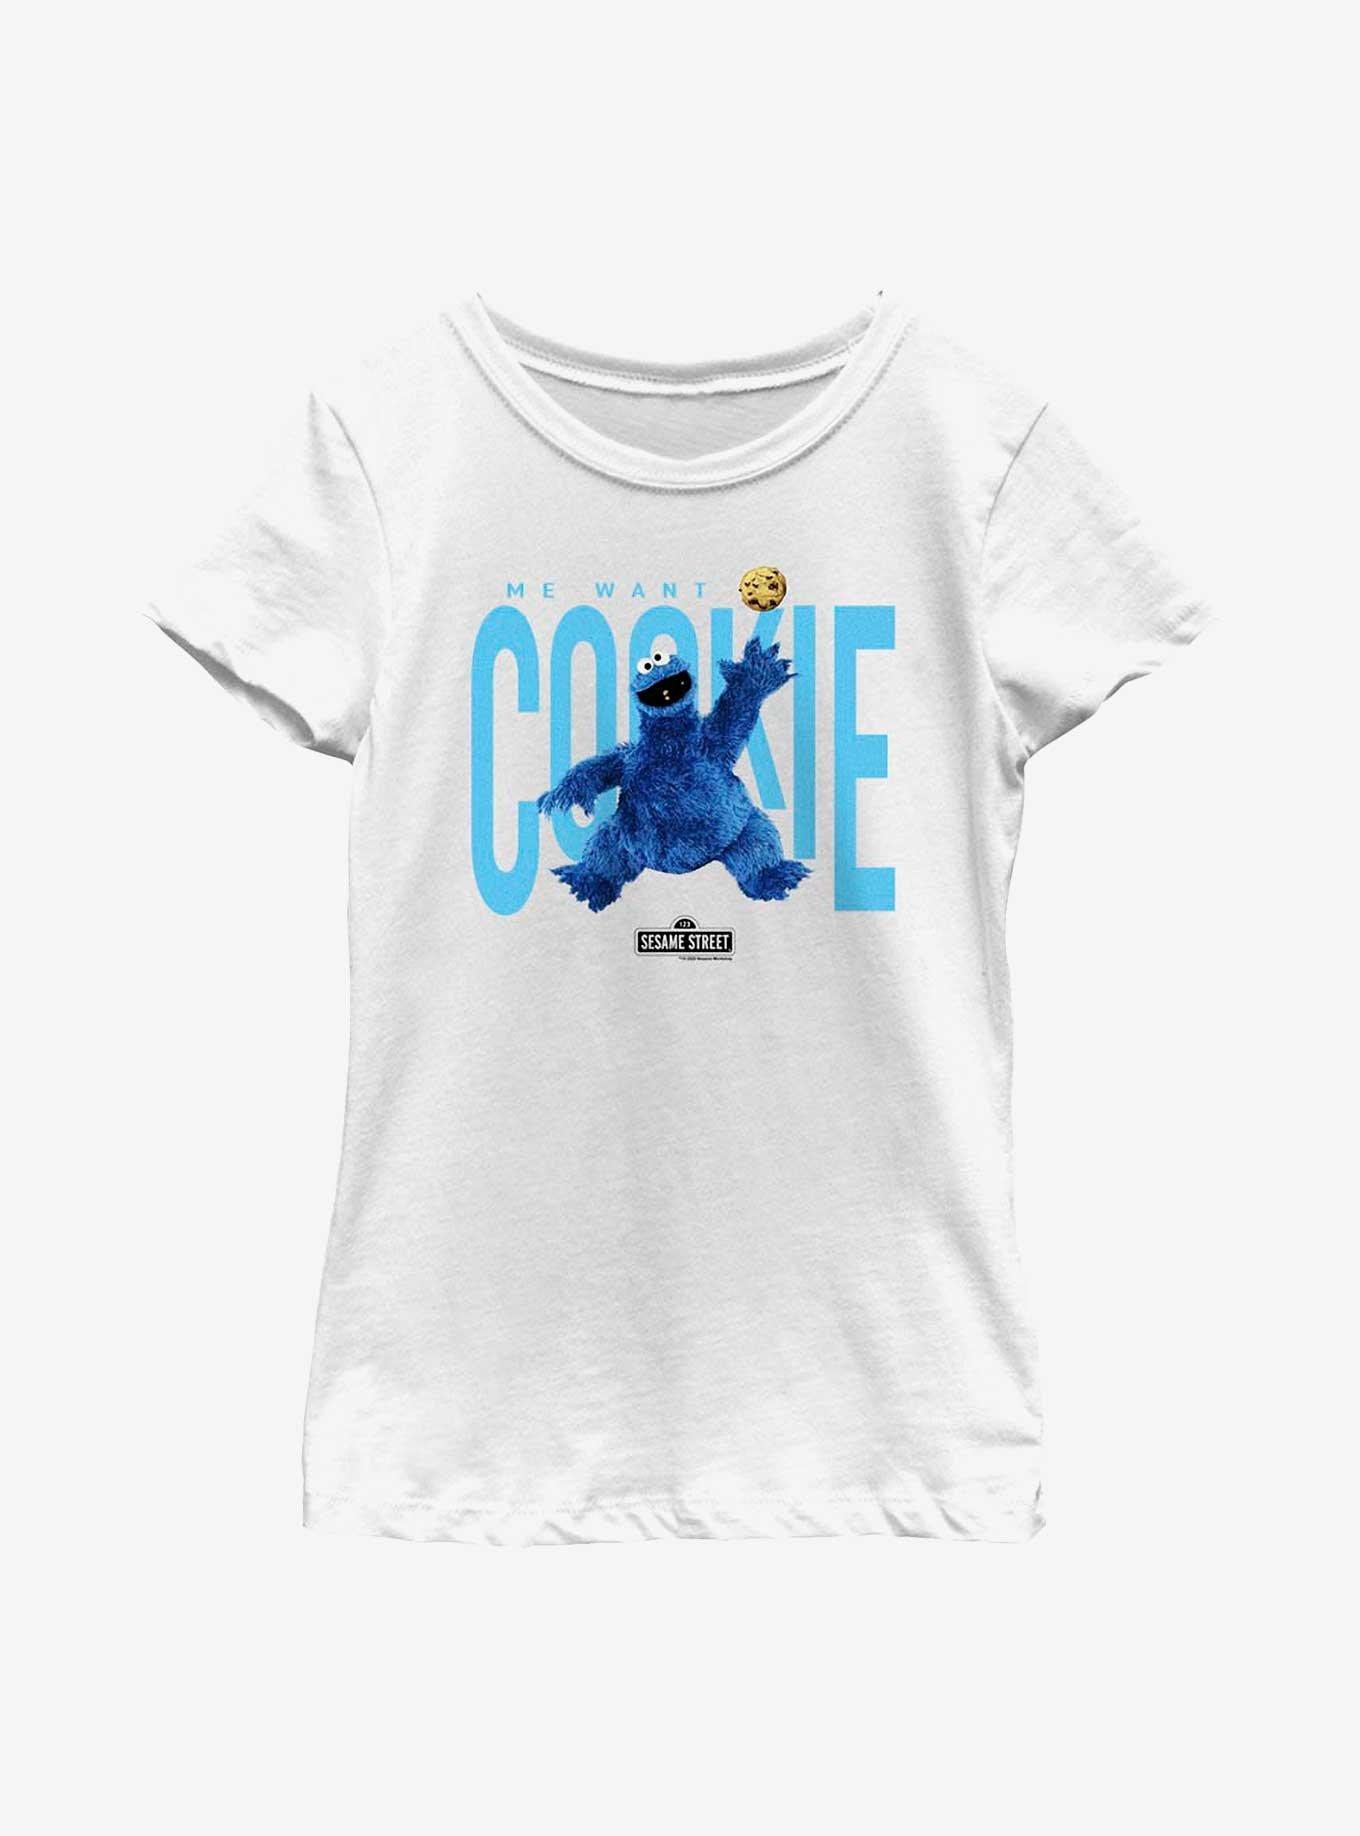 Sesame Street Air Cookie Monster Want Cookie Youth Girls T-Shirt, WHITE, hi-res